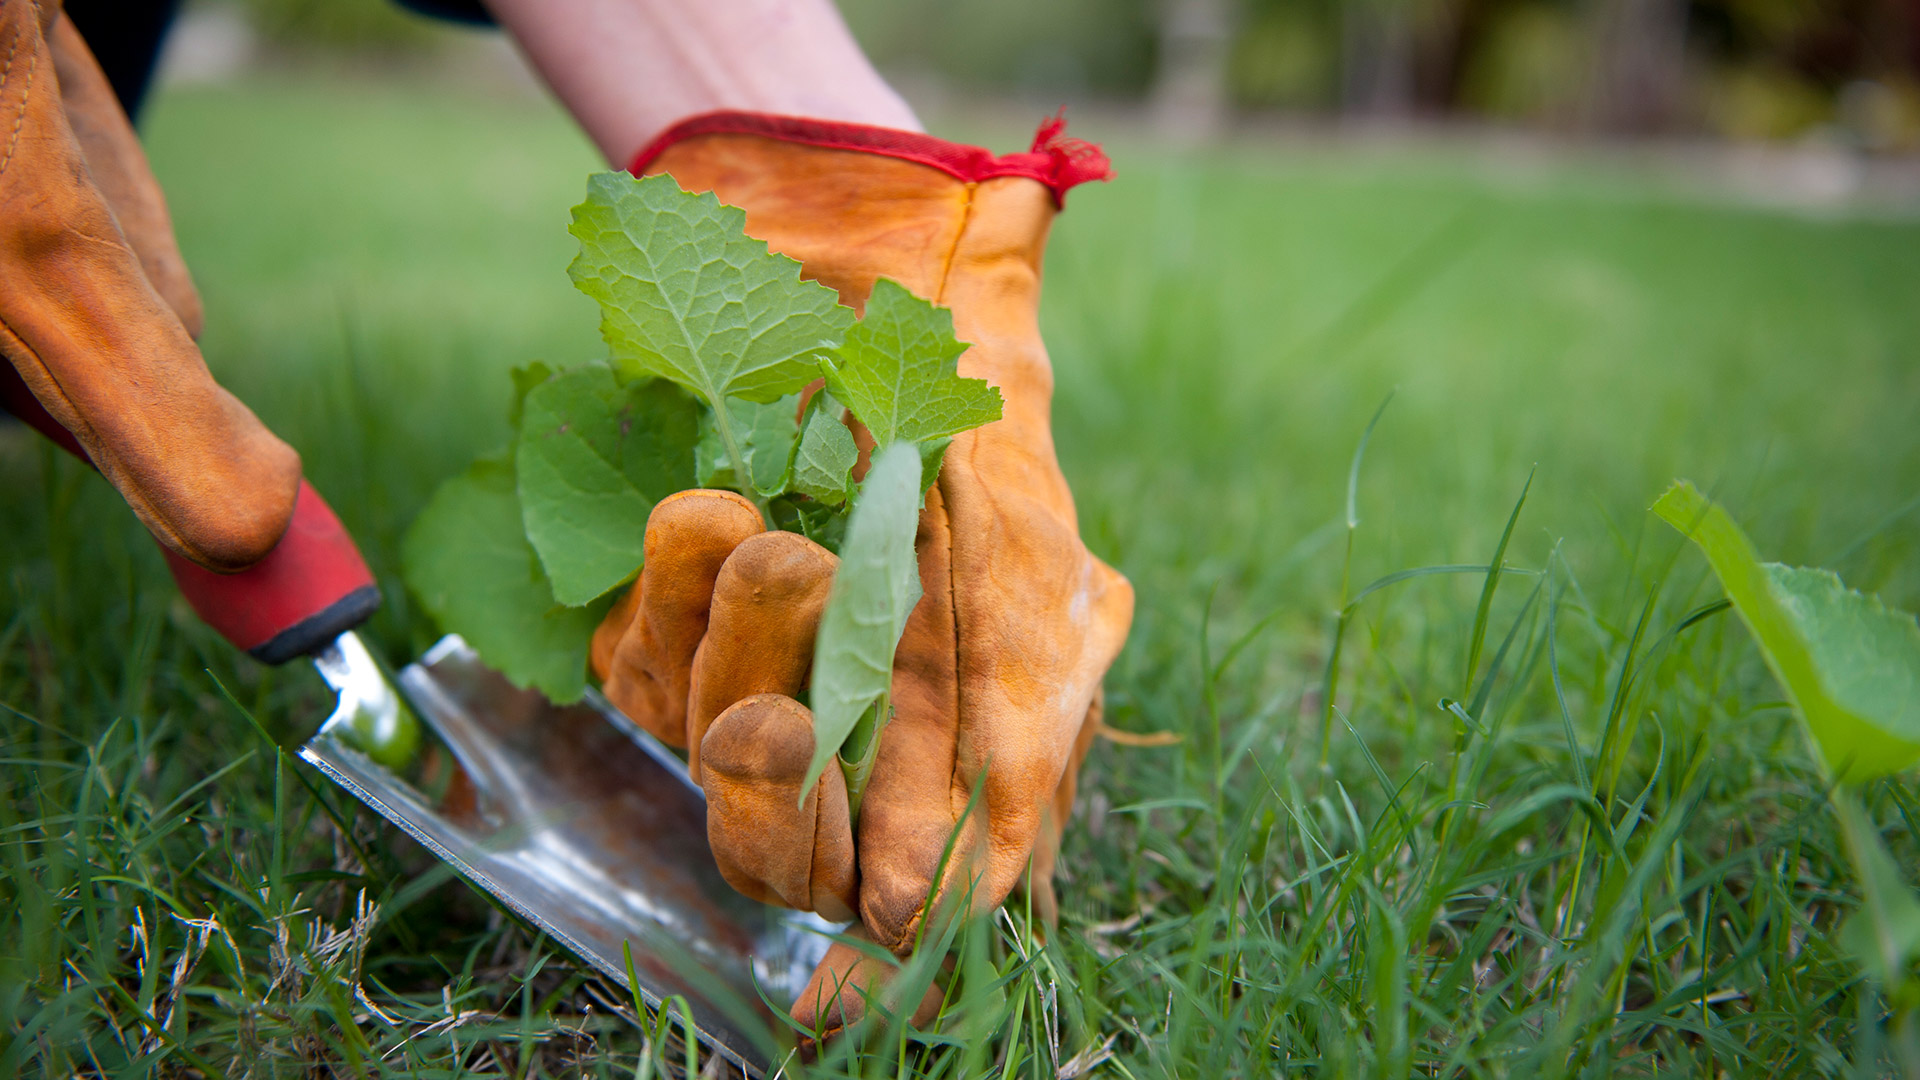 Hand-Pulling Pesky Weeds Is a Great Way to Make the Problem Worse